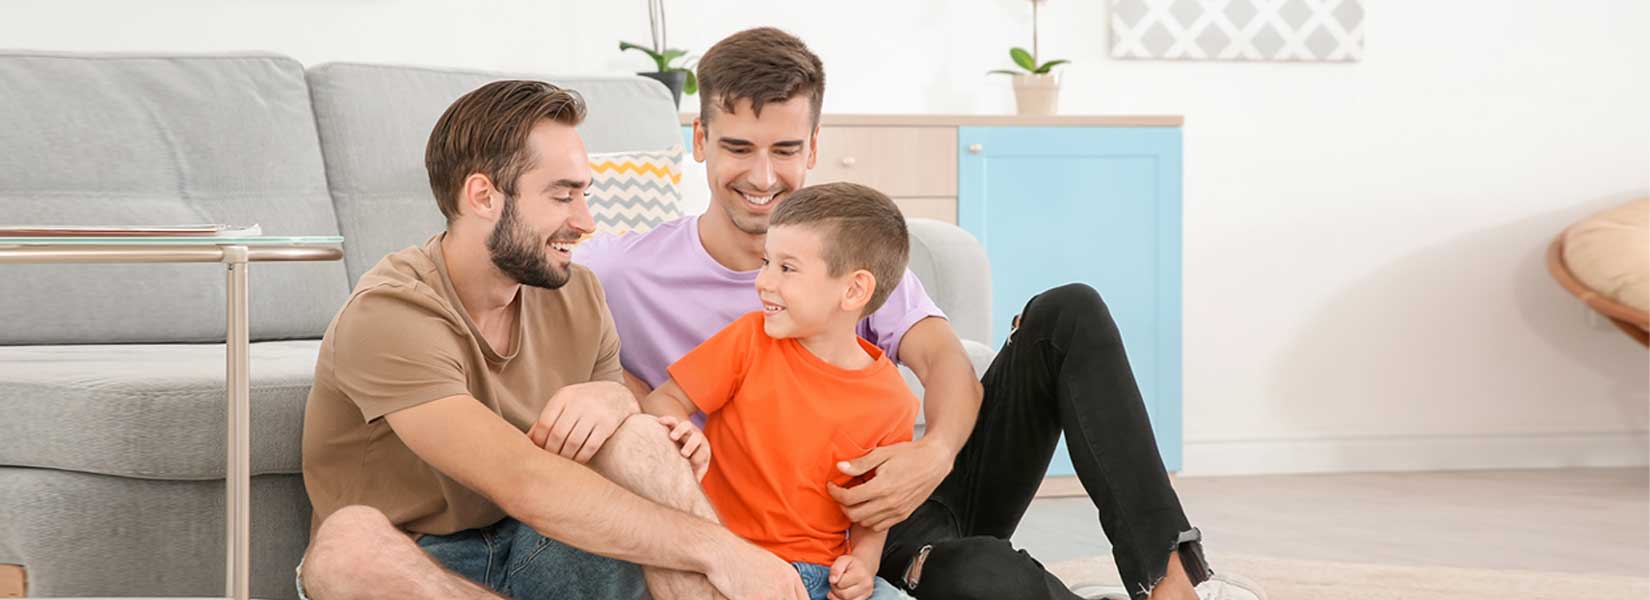 the challenges lgbt couples face | austin lgbt adoption attorney